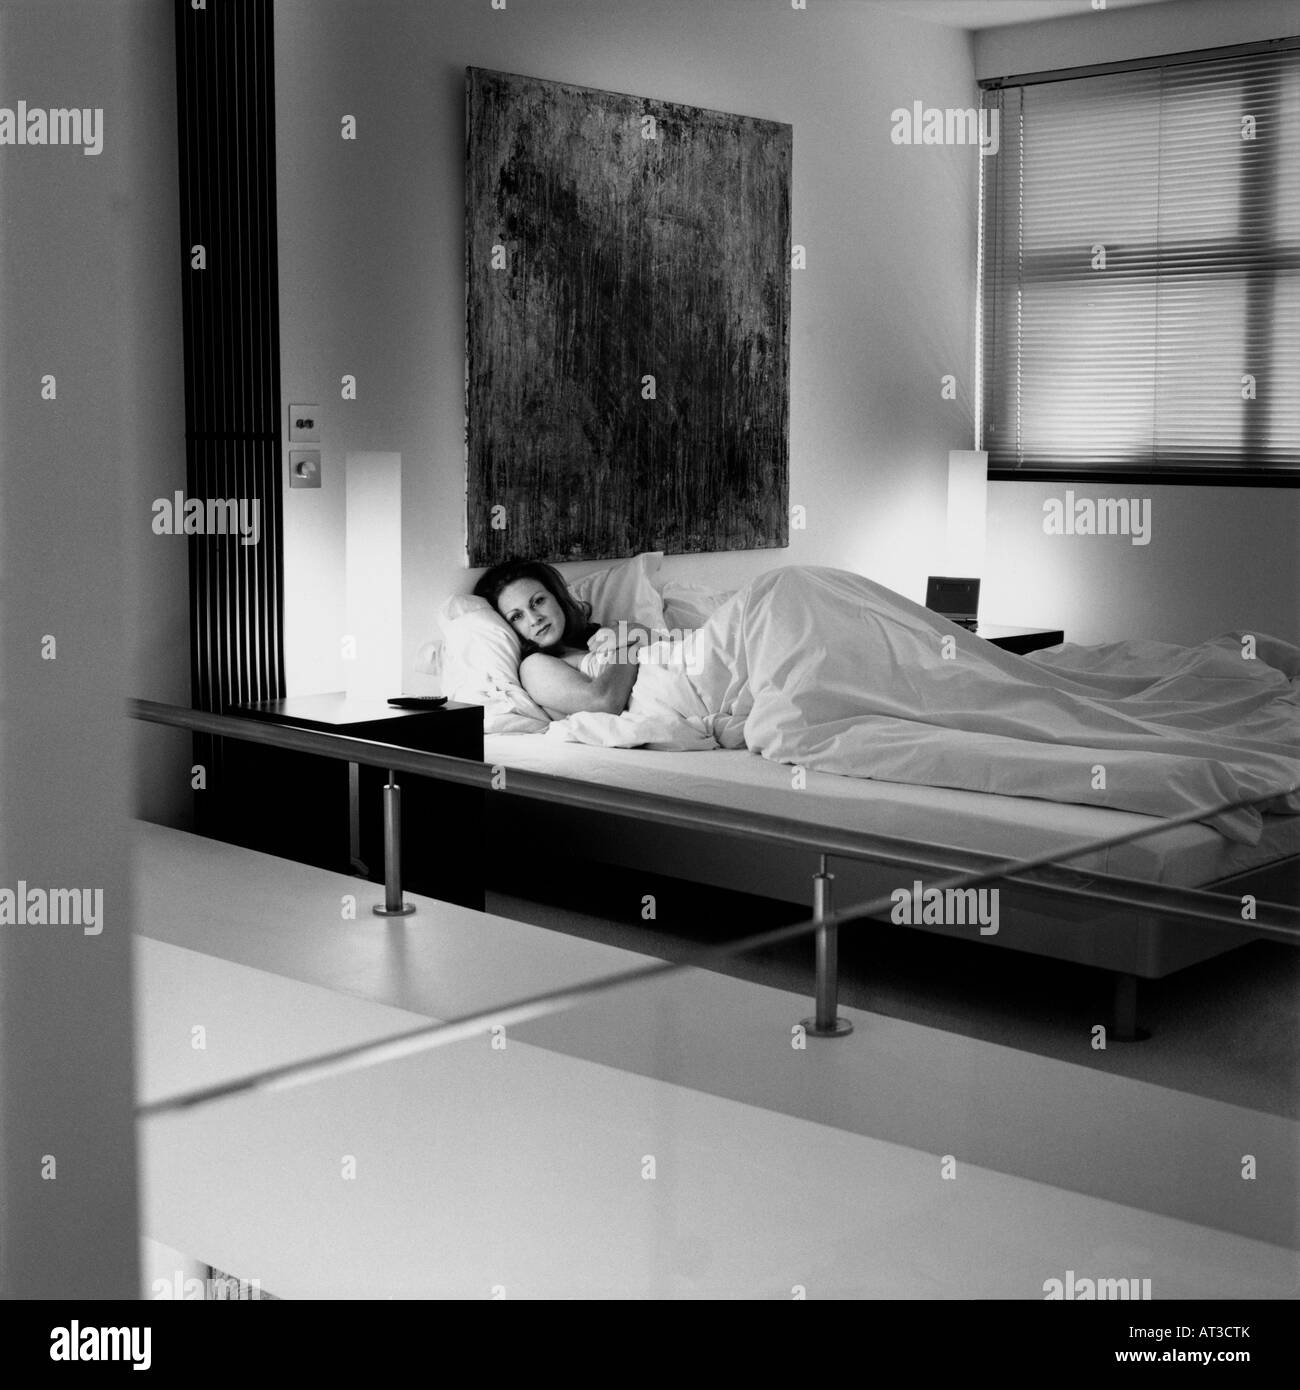 A woman lying in bed Stock Photo